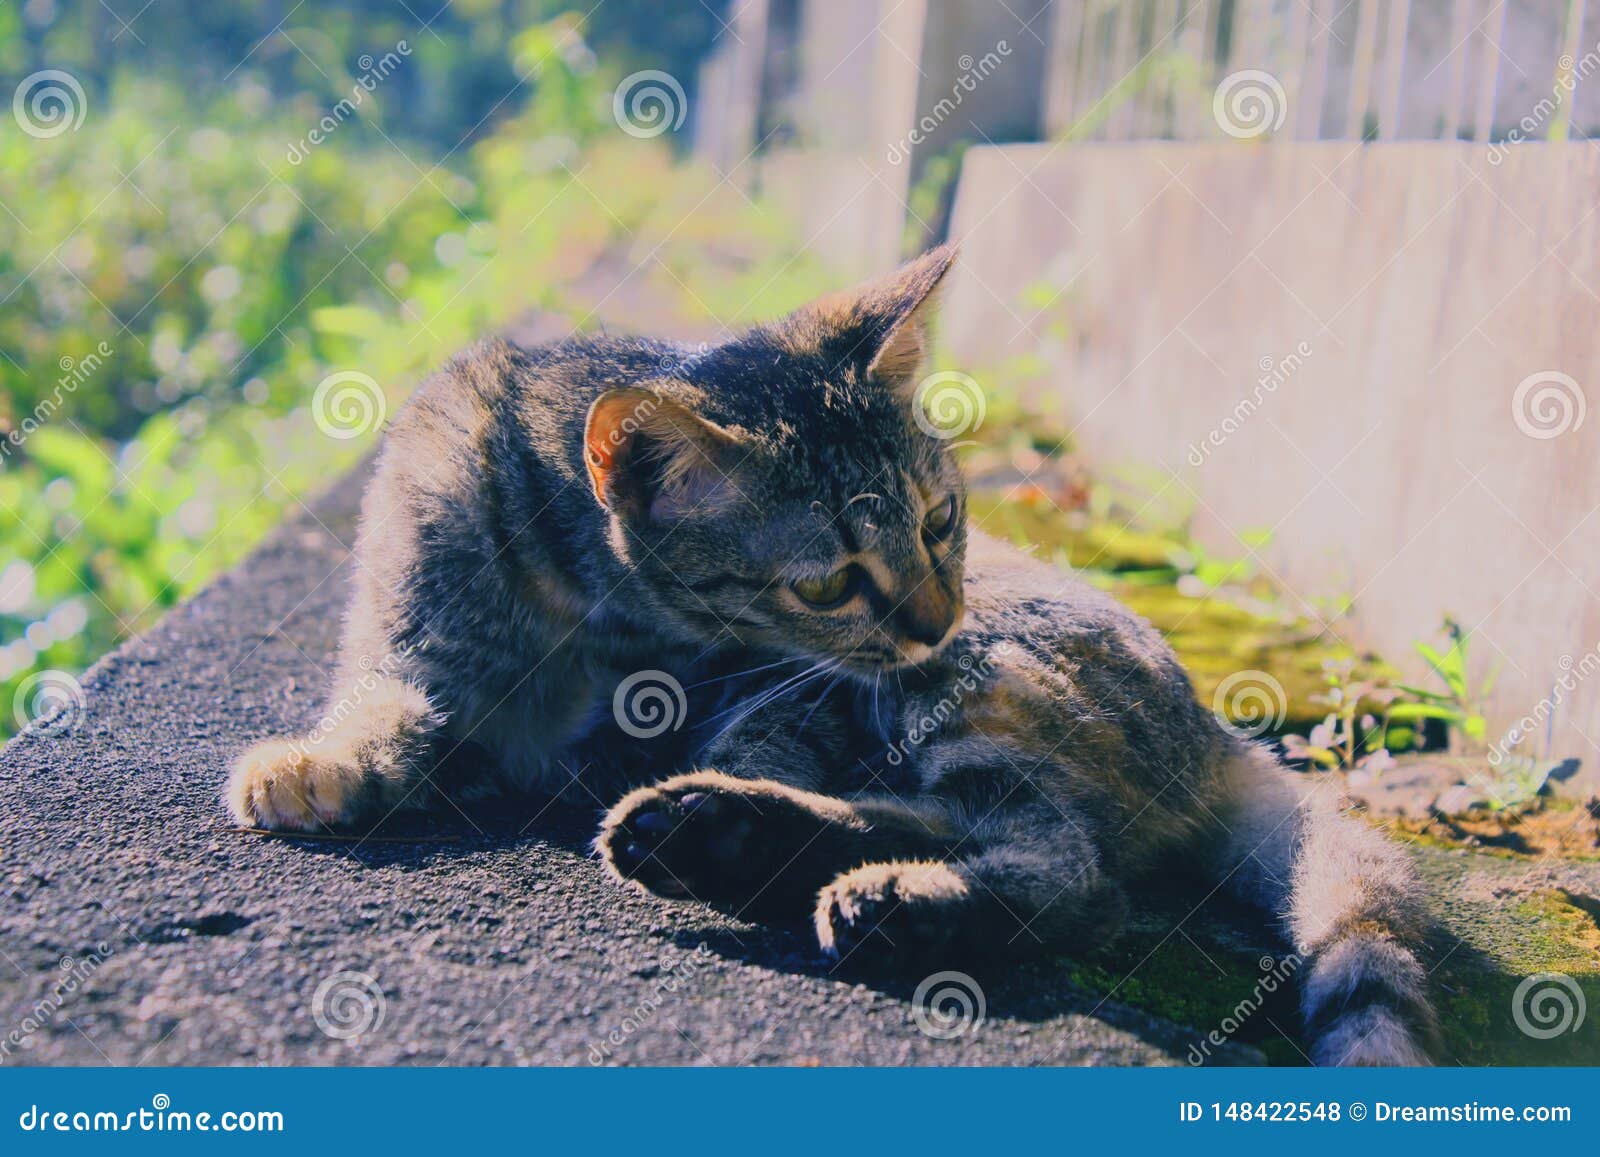 5+ Hundred Cat Cigarette Royalty-Free Images, Stock Photos & Pictures